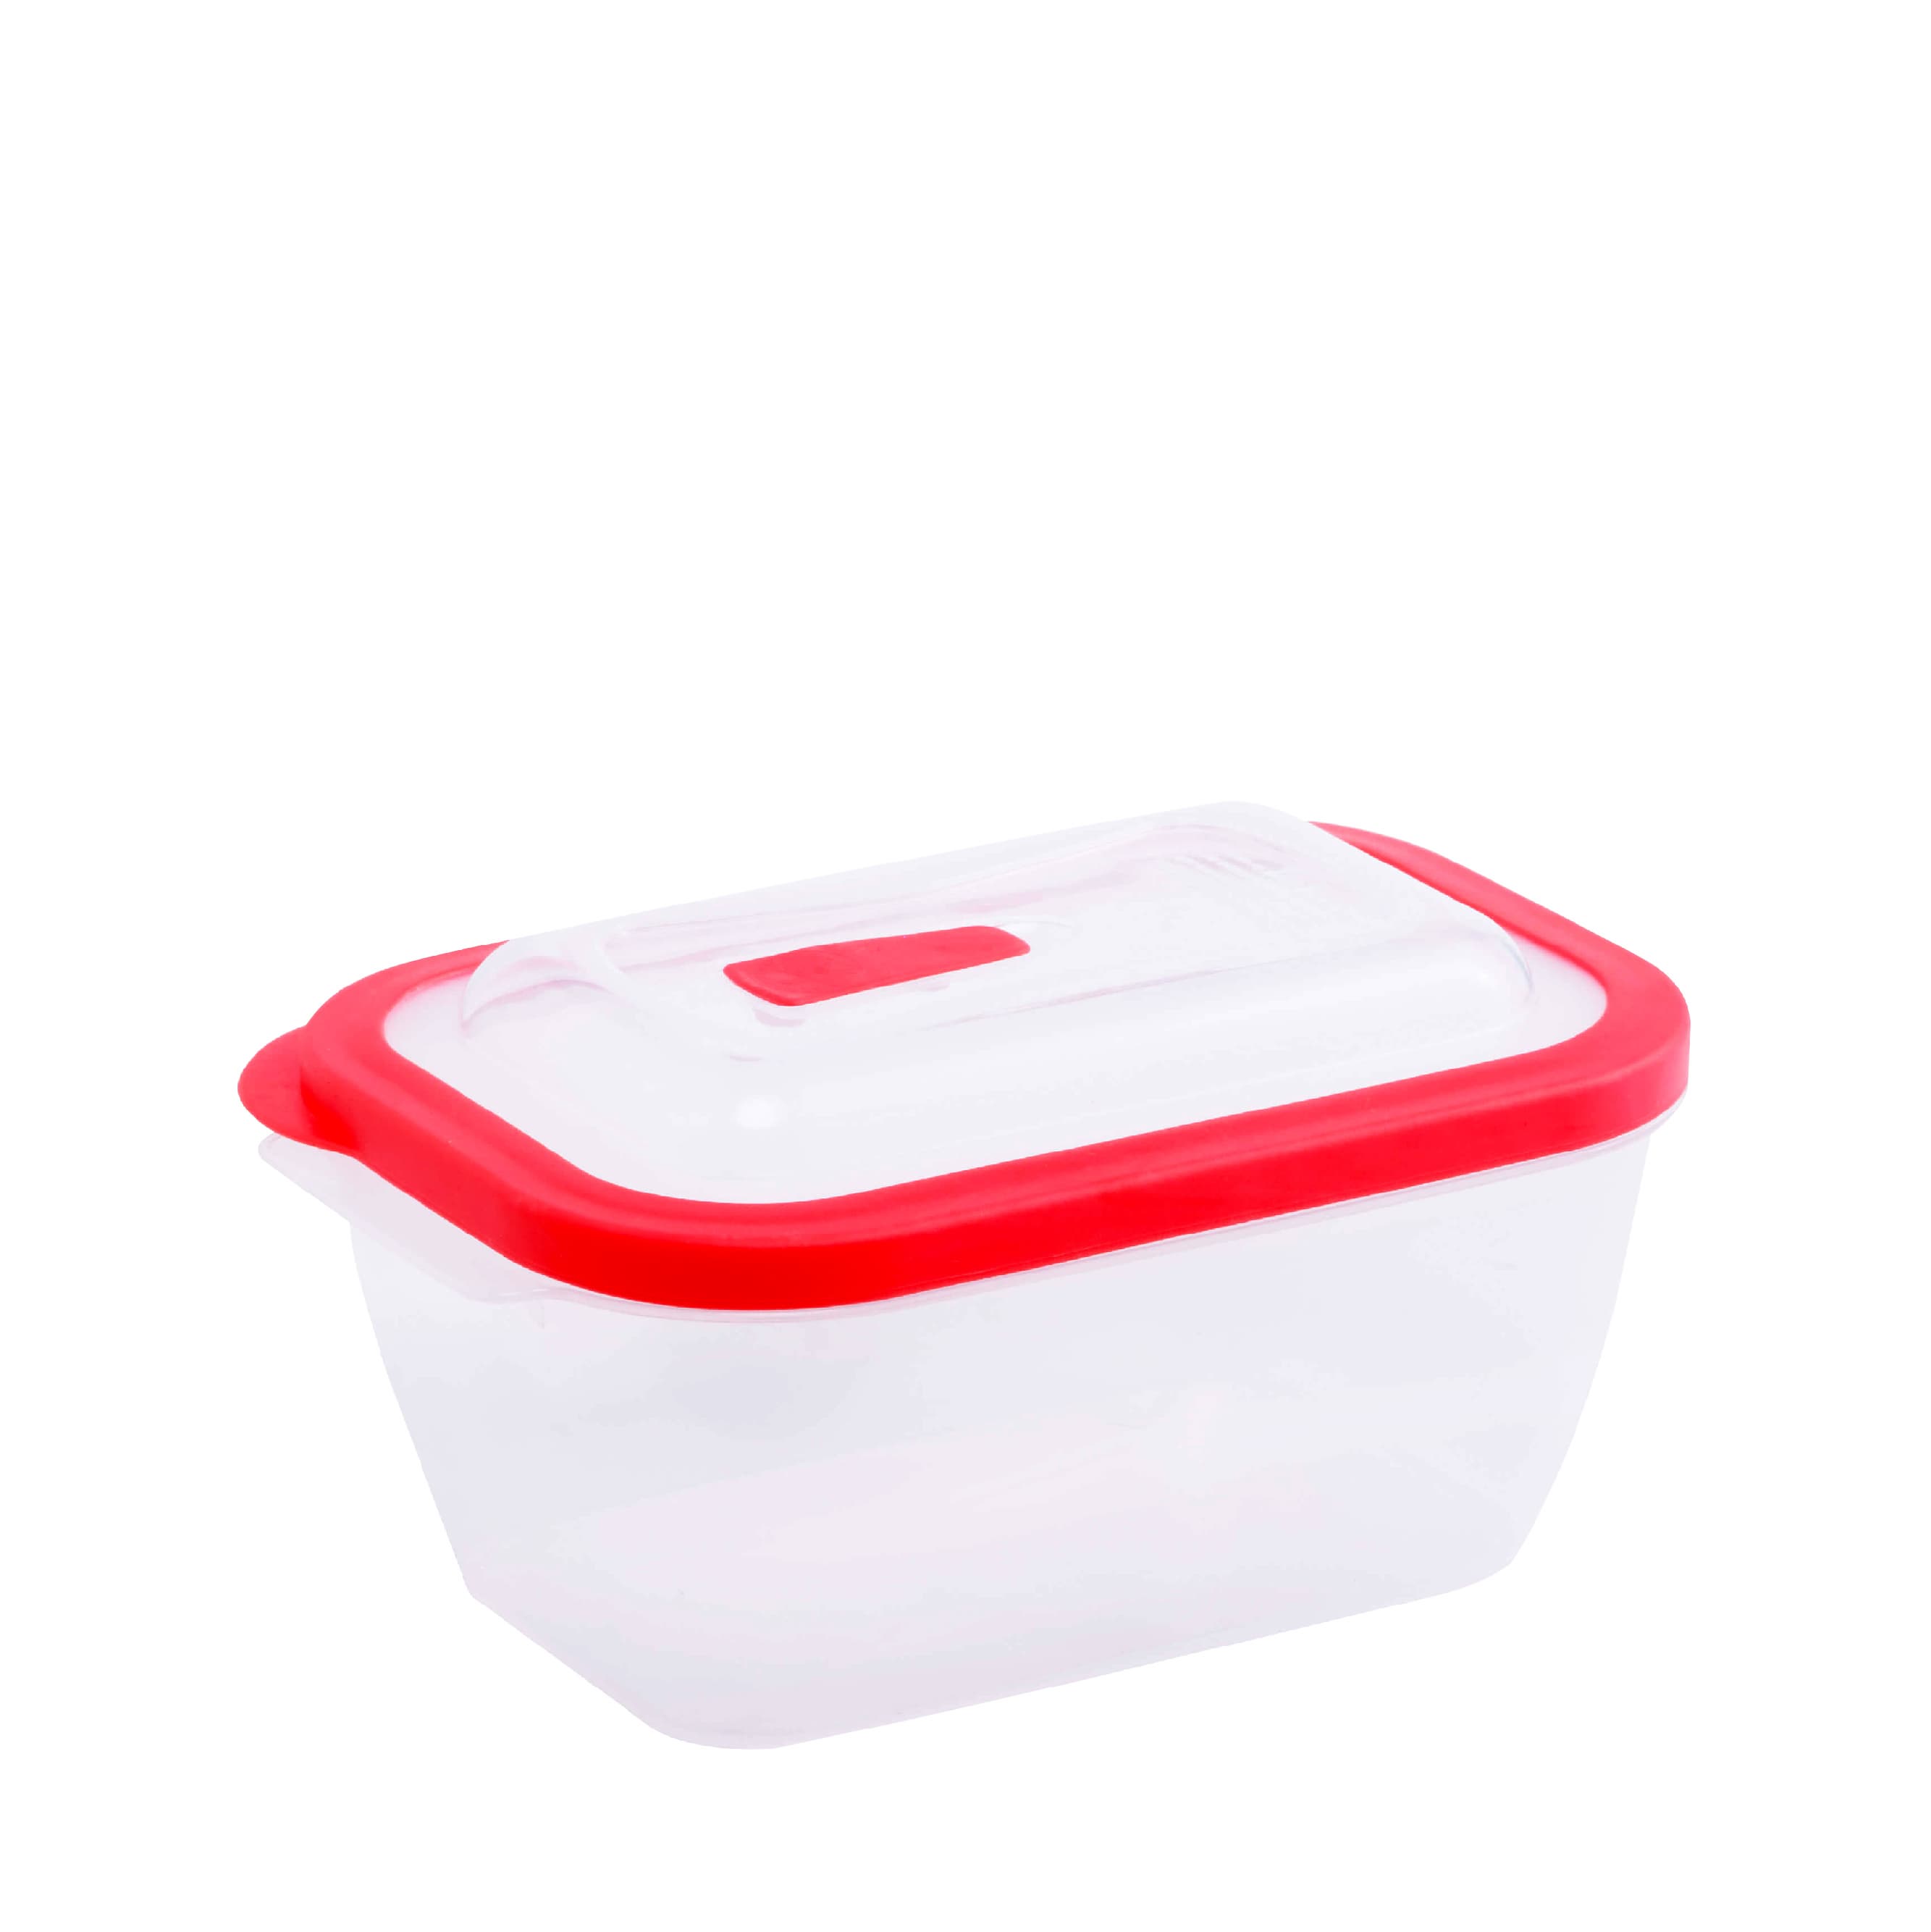 Airtight Food Containers _ Food Container L647